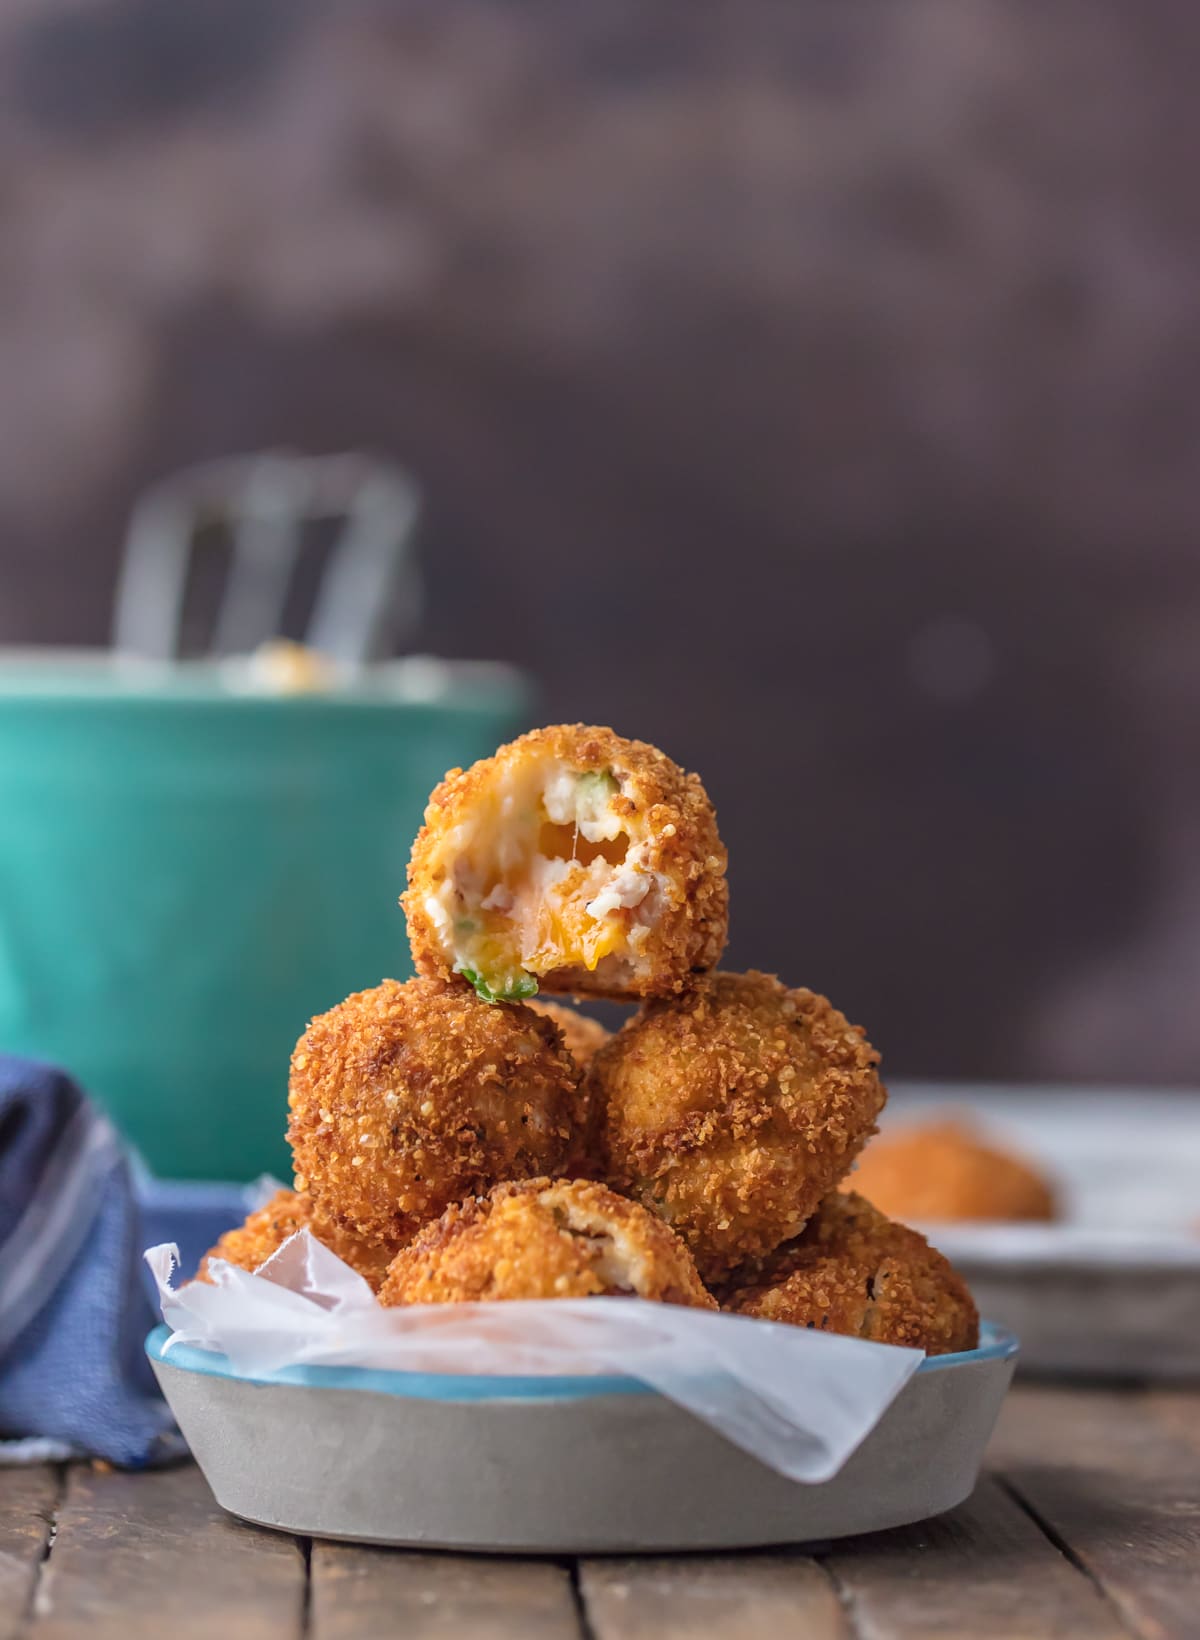 Fried Mashed Potato Balls stacked on top of each other